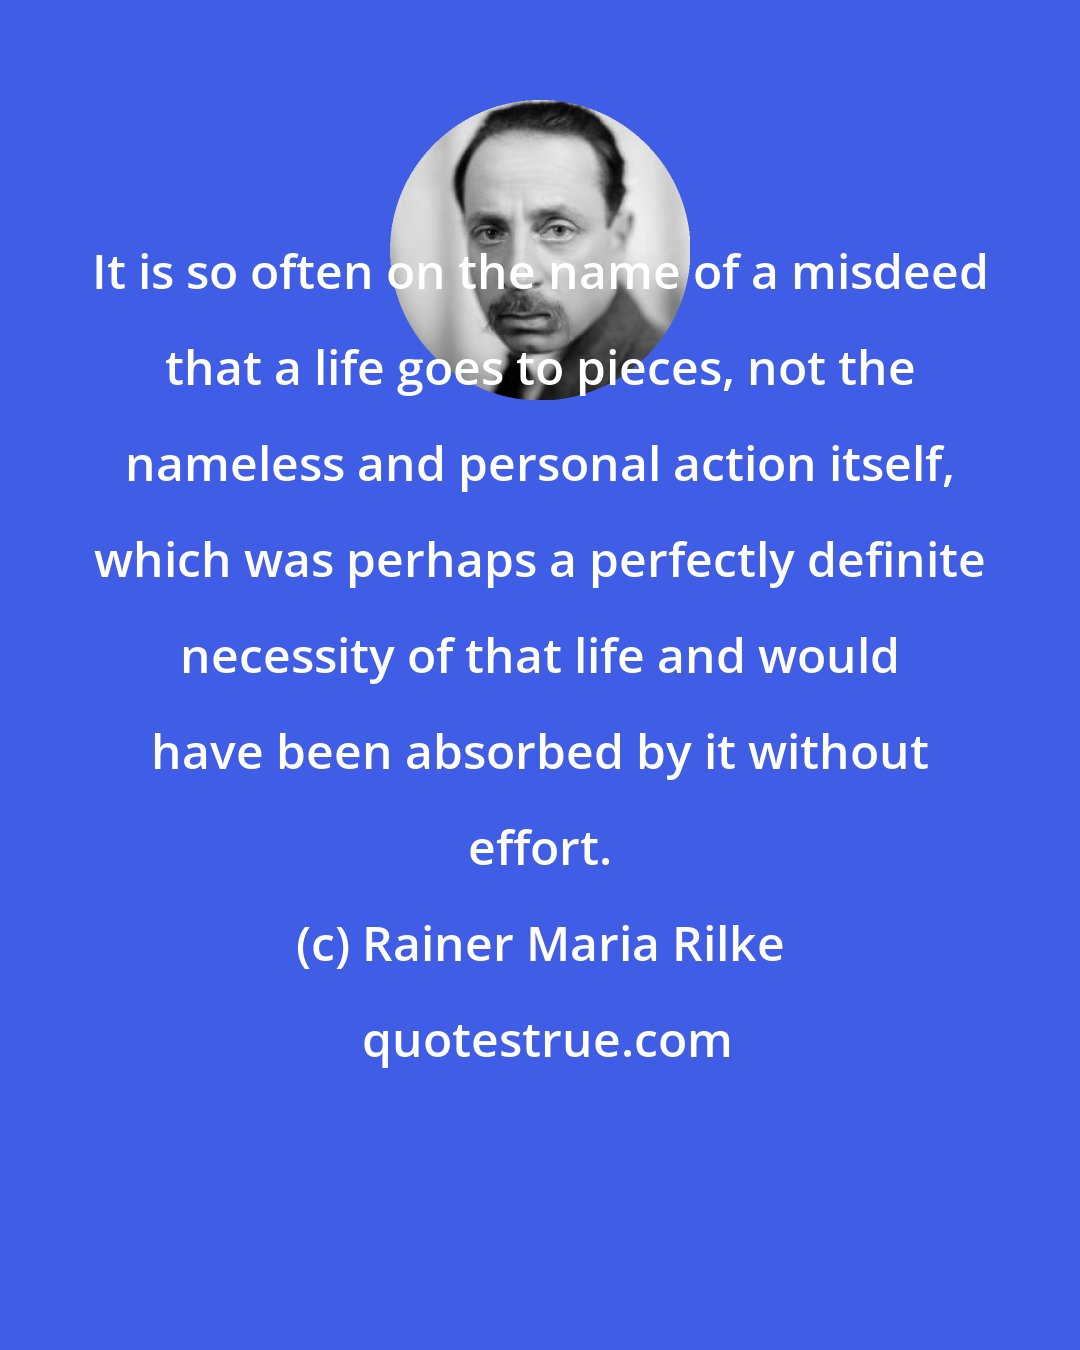 Rainer Maria Rilke: It is so often on the name of a misdeed that a life goes to pieces, not the nameless and personal action itself, which was perhaps a perfectly definite necessity of that life and would have been absorbed by it without effort.